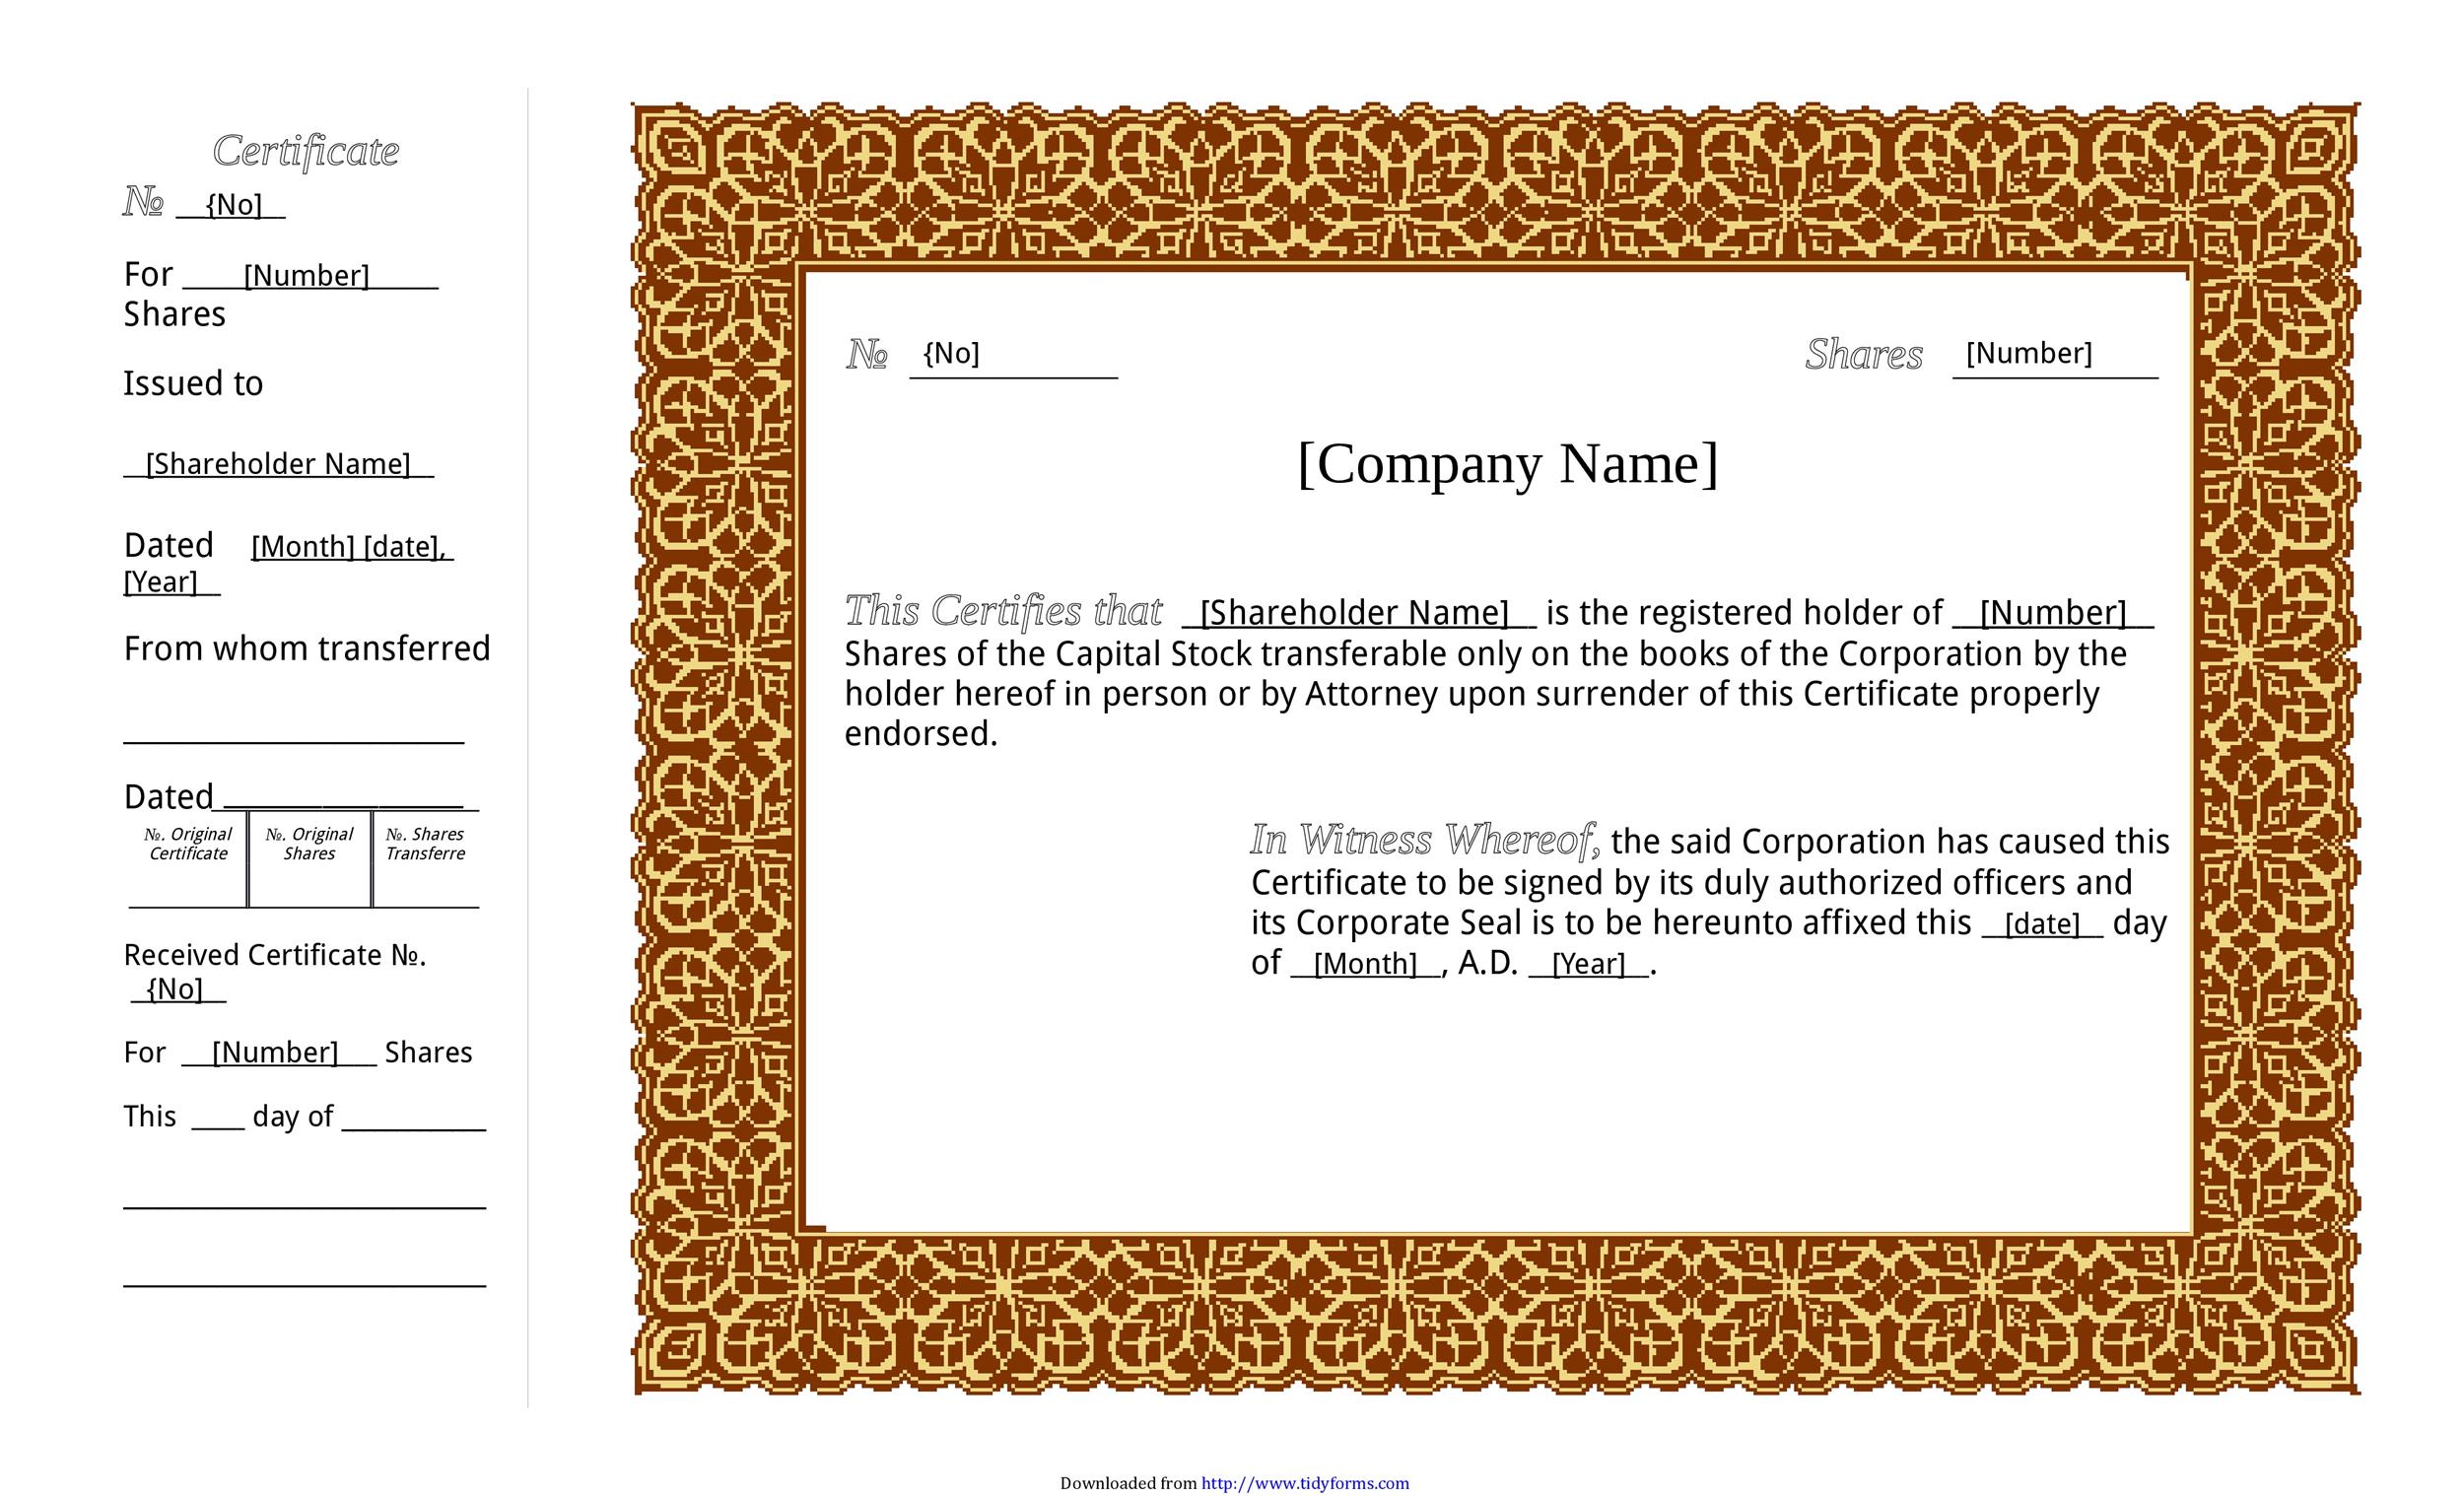 Share Certificate Templates 12+ Free Word, Excel & PDF Formats